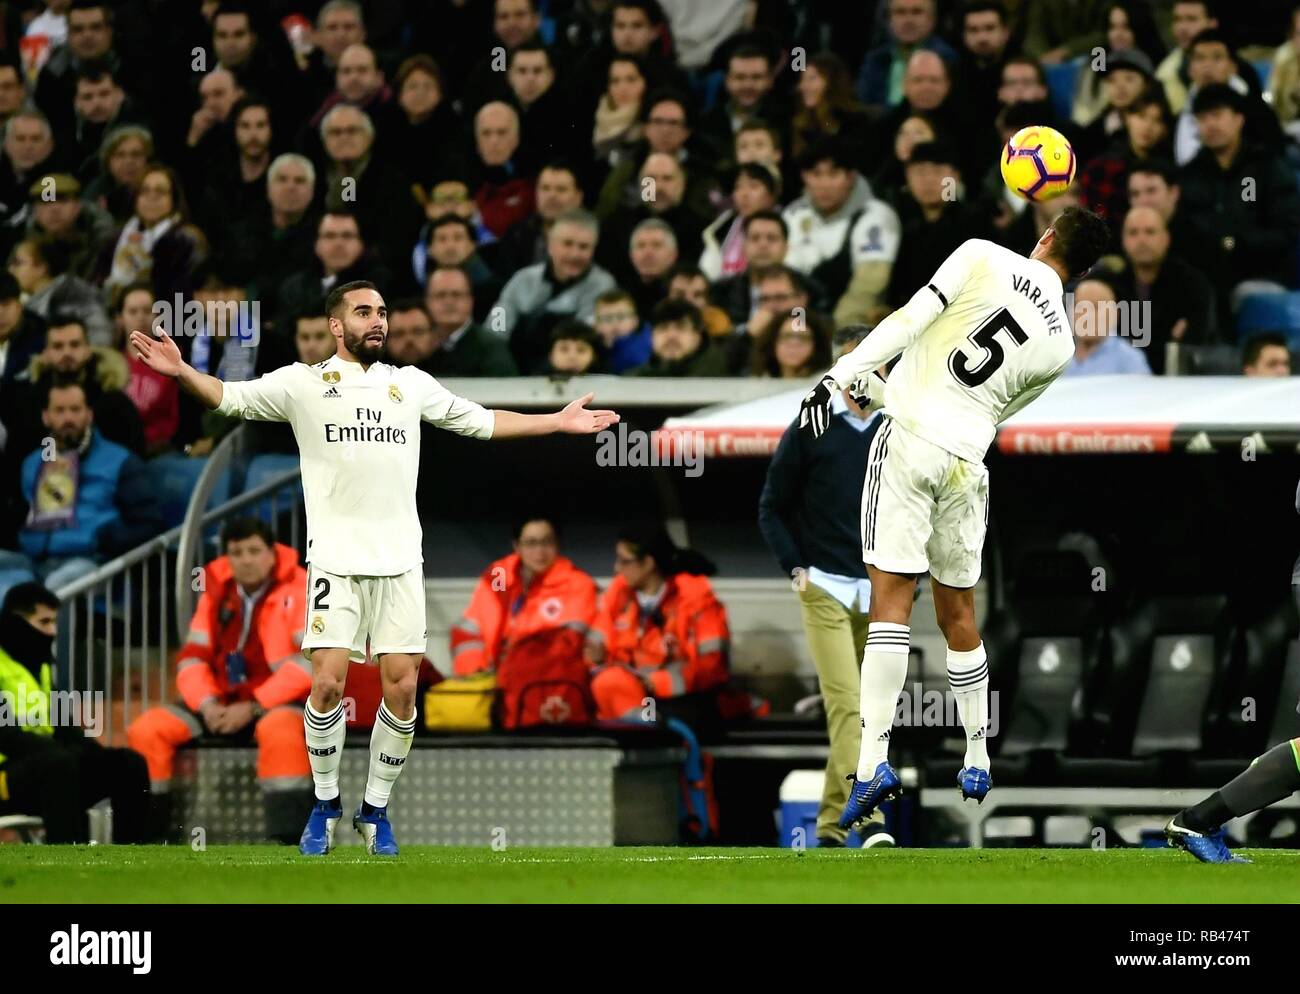 Madrid, Spain. 6th Jan, 2019. Real Madrid's Dani Carvajal (L) and Raphael Varane compete during the Spanish La Liga soccer match between Real Madrid and Real Sociedad in Madrid, Spain, Jan. 6, 2019. Real Madrid lost 0-2. Credit: Guo Qiuda/Xinhua/Alamy Live News Stock Photo